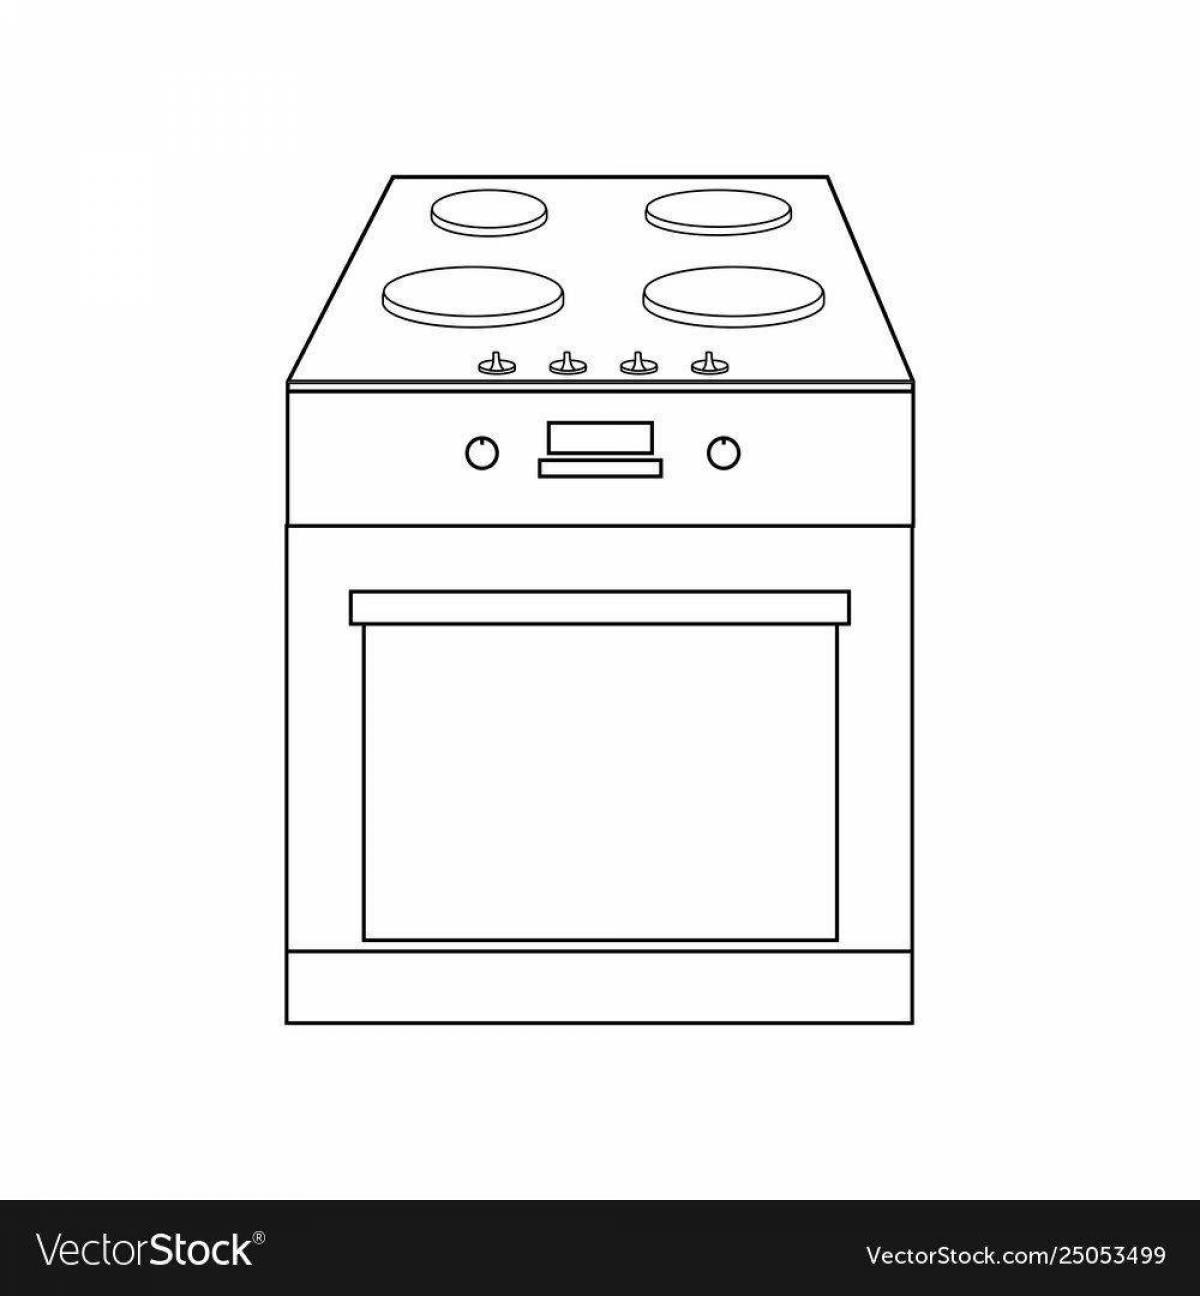 Coloring book stylish stove